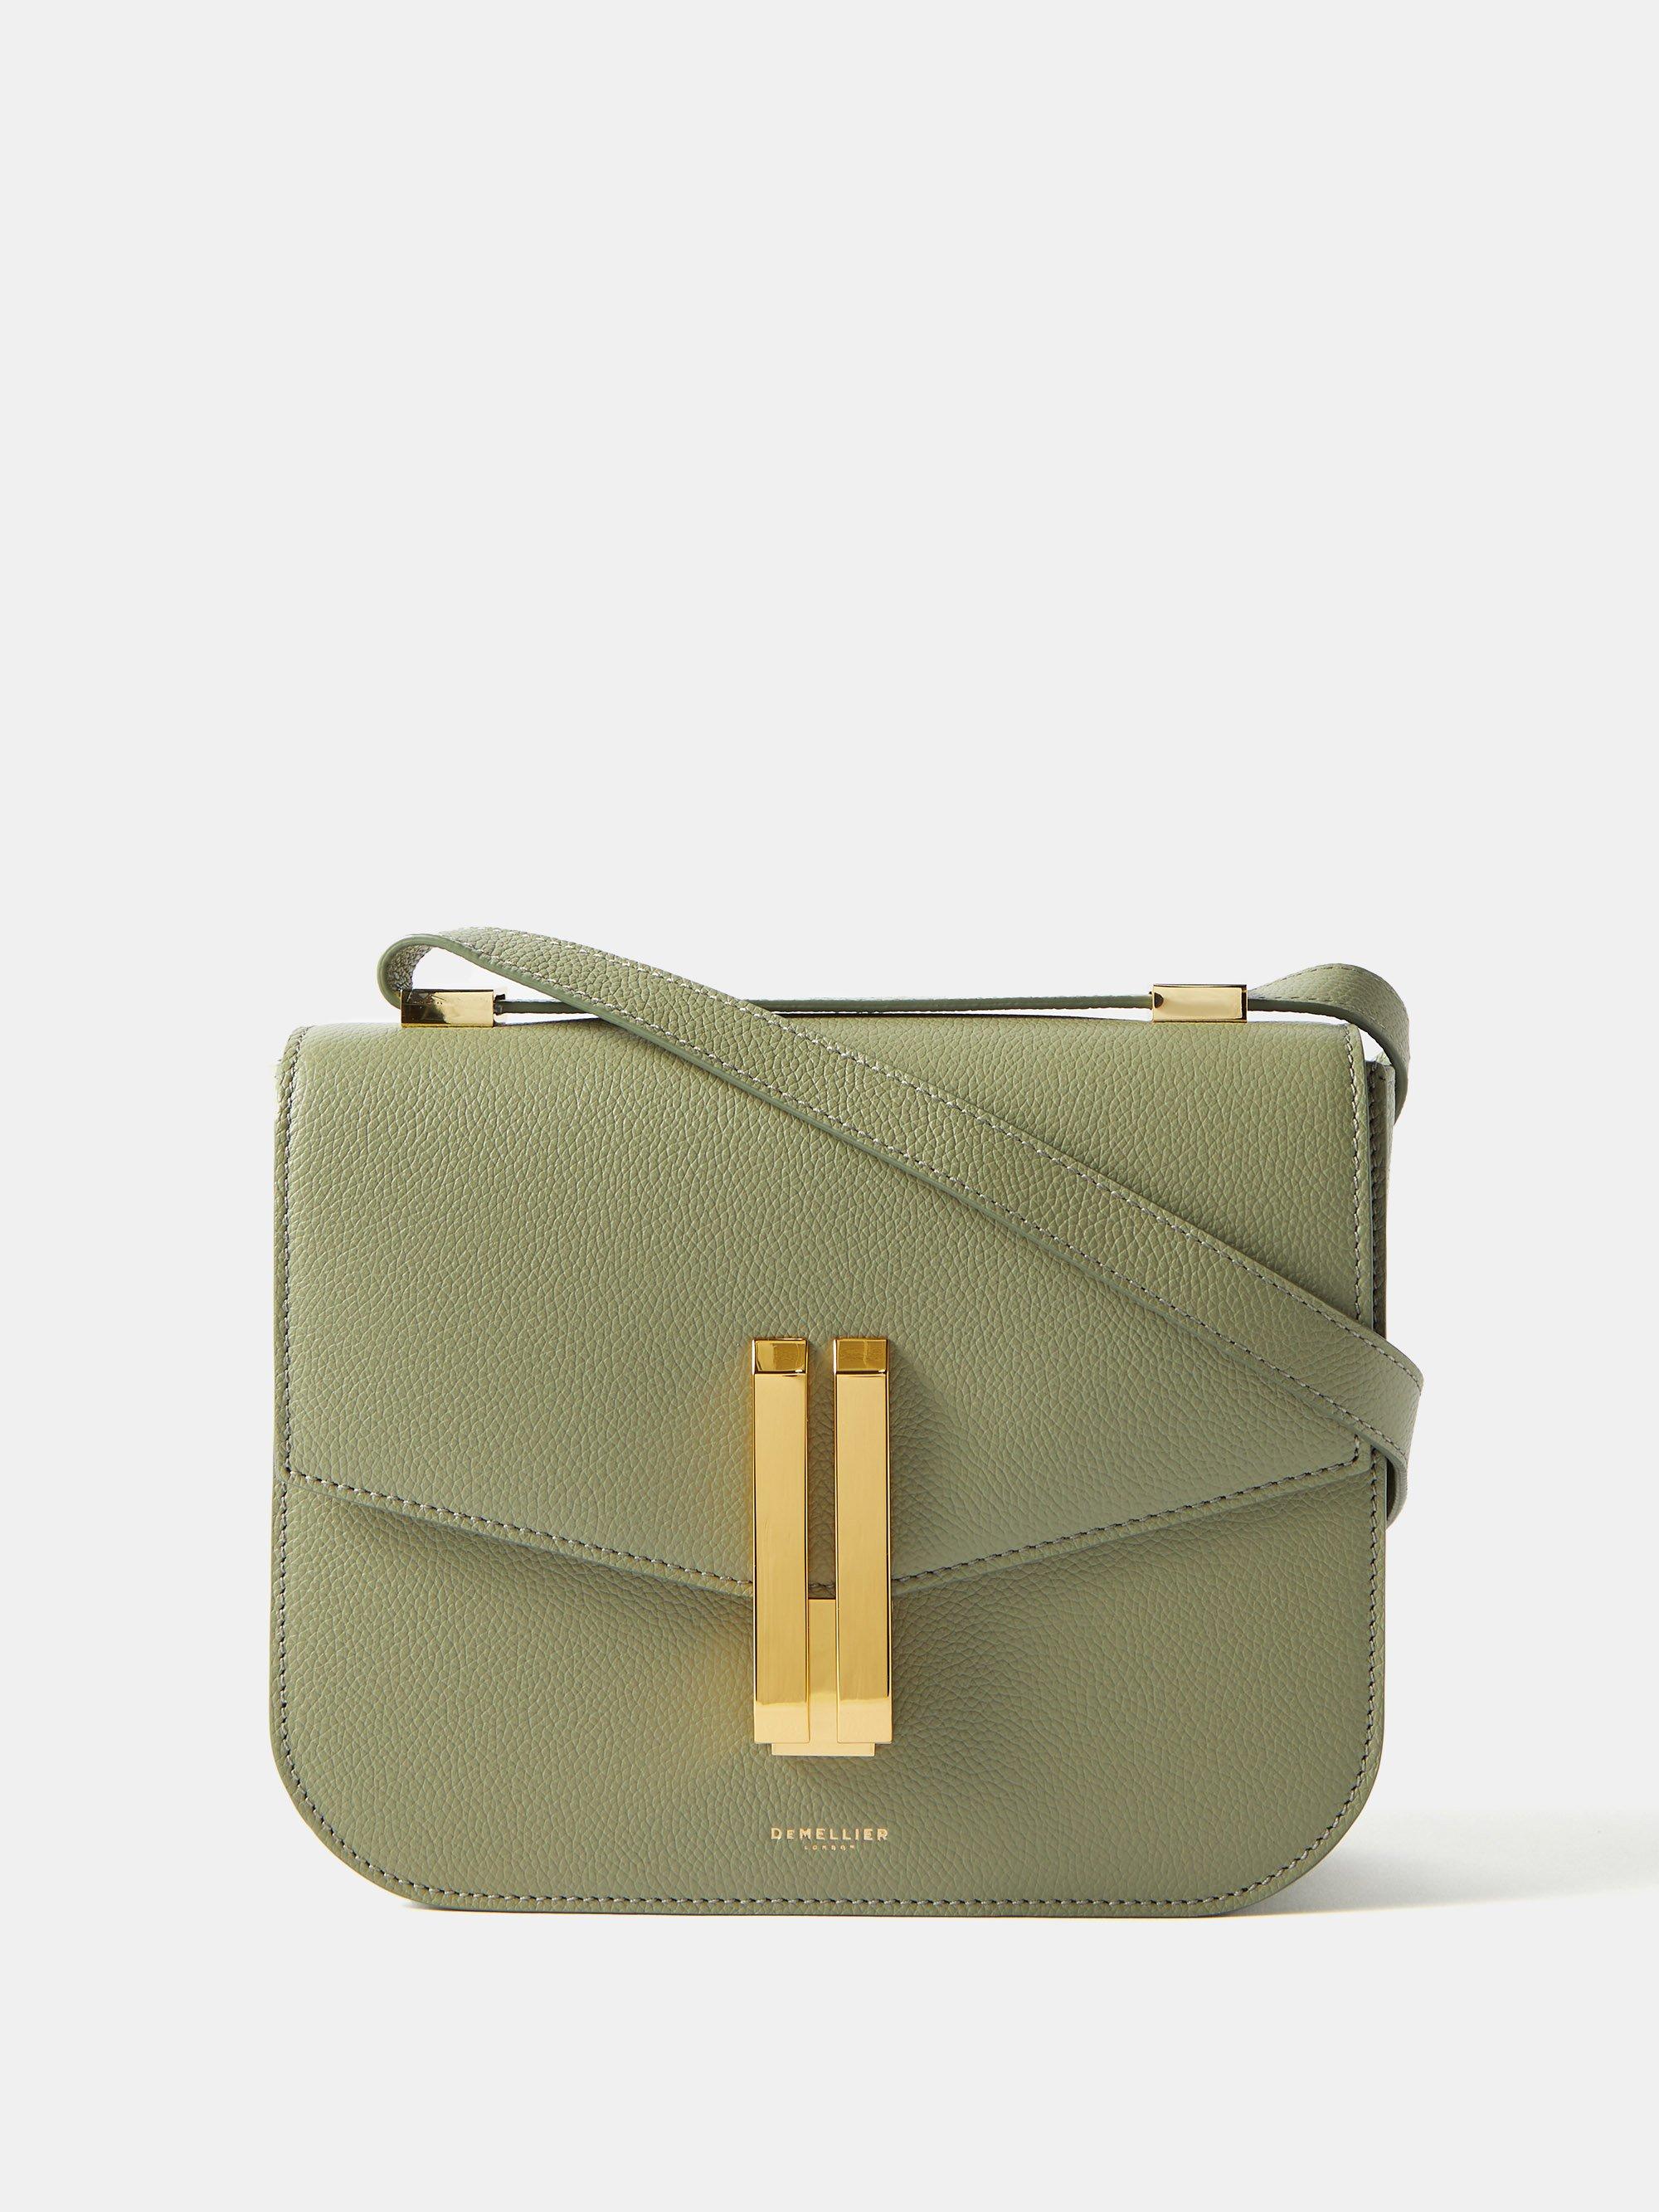 DeMellier Vancouver Leather Cross-body Bag in Green | Lyst